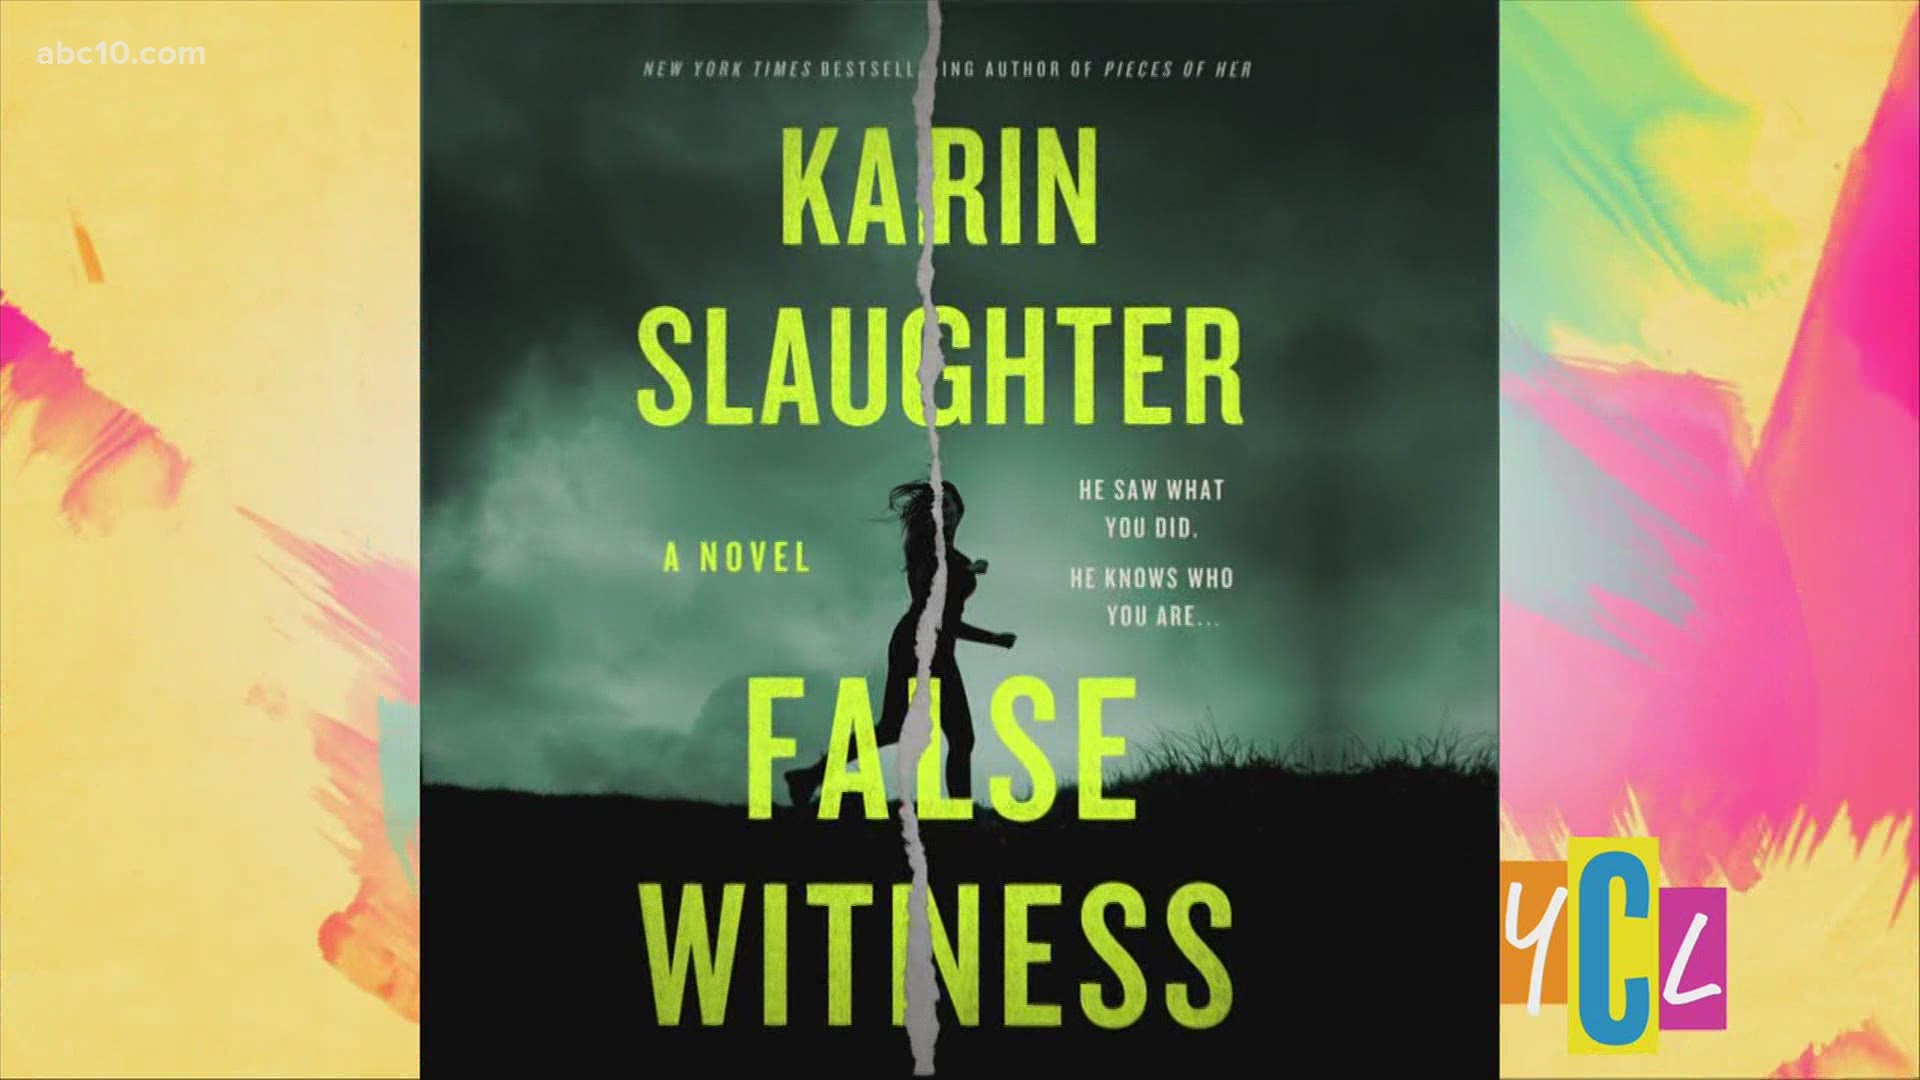 Author Karin Slaughter's new book, ‘False Witness’ is a timely high-stakes thriller with pandemic-related themes and she stops in help us read into the storyline.